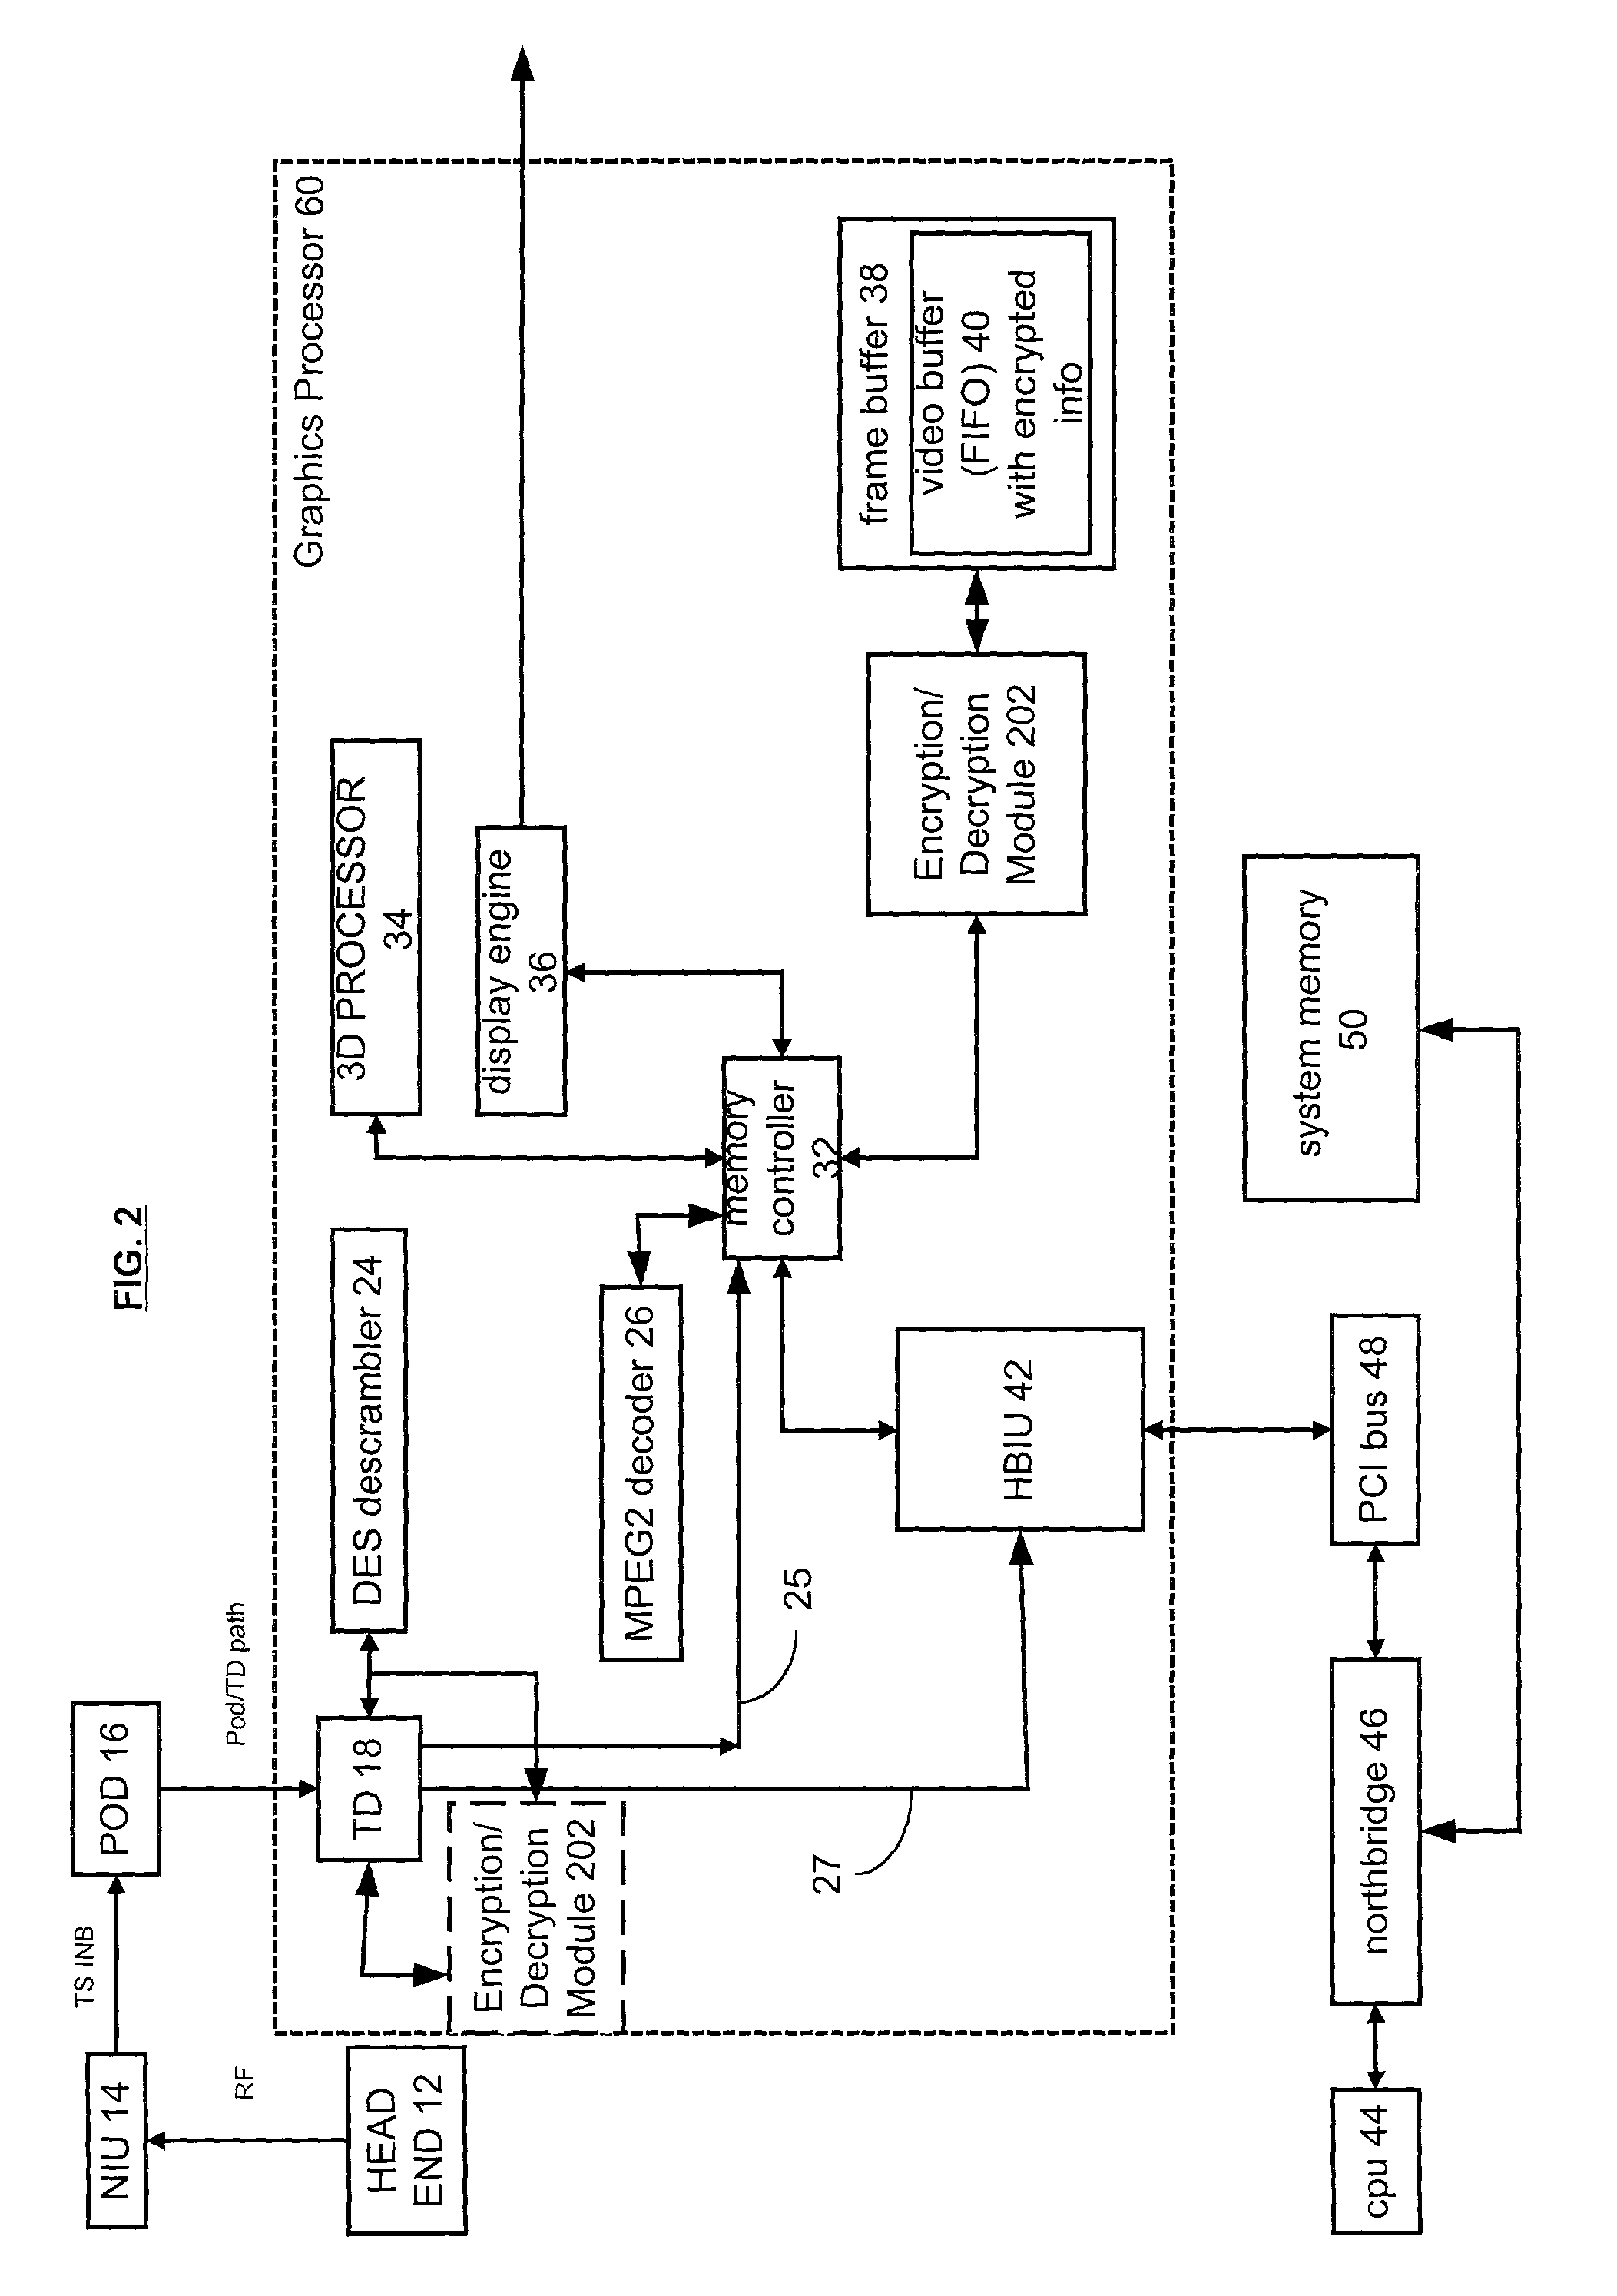 Method and apparatus for maintaining secure and nonsecure data in a shared memory system